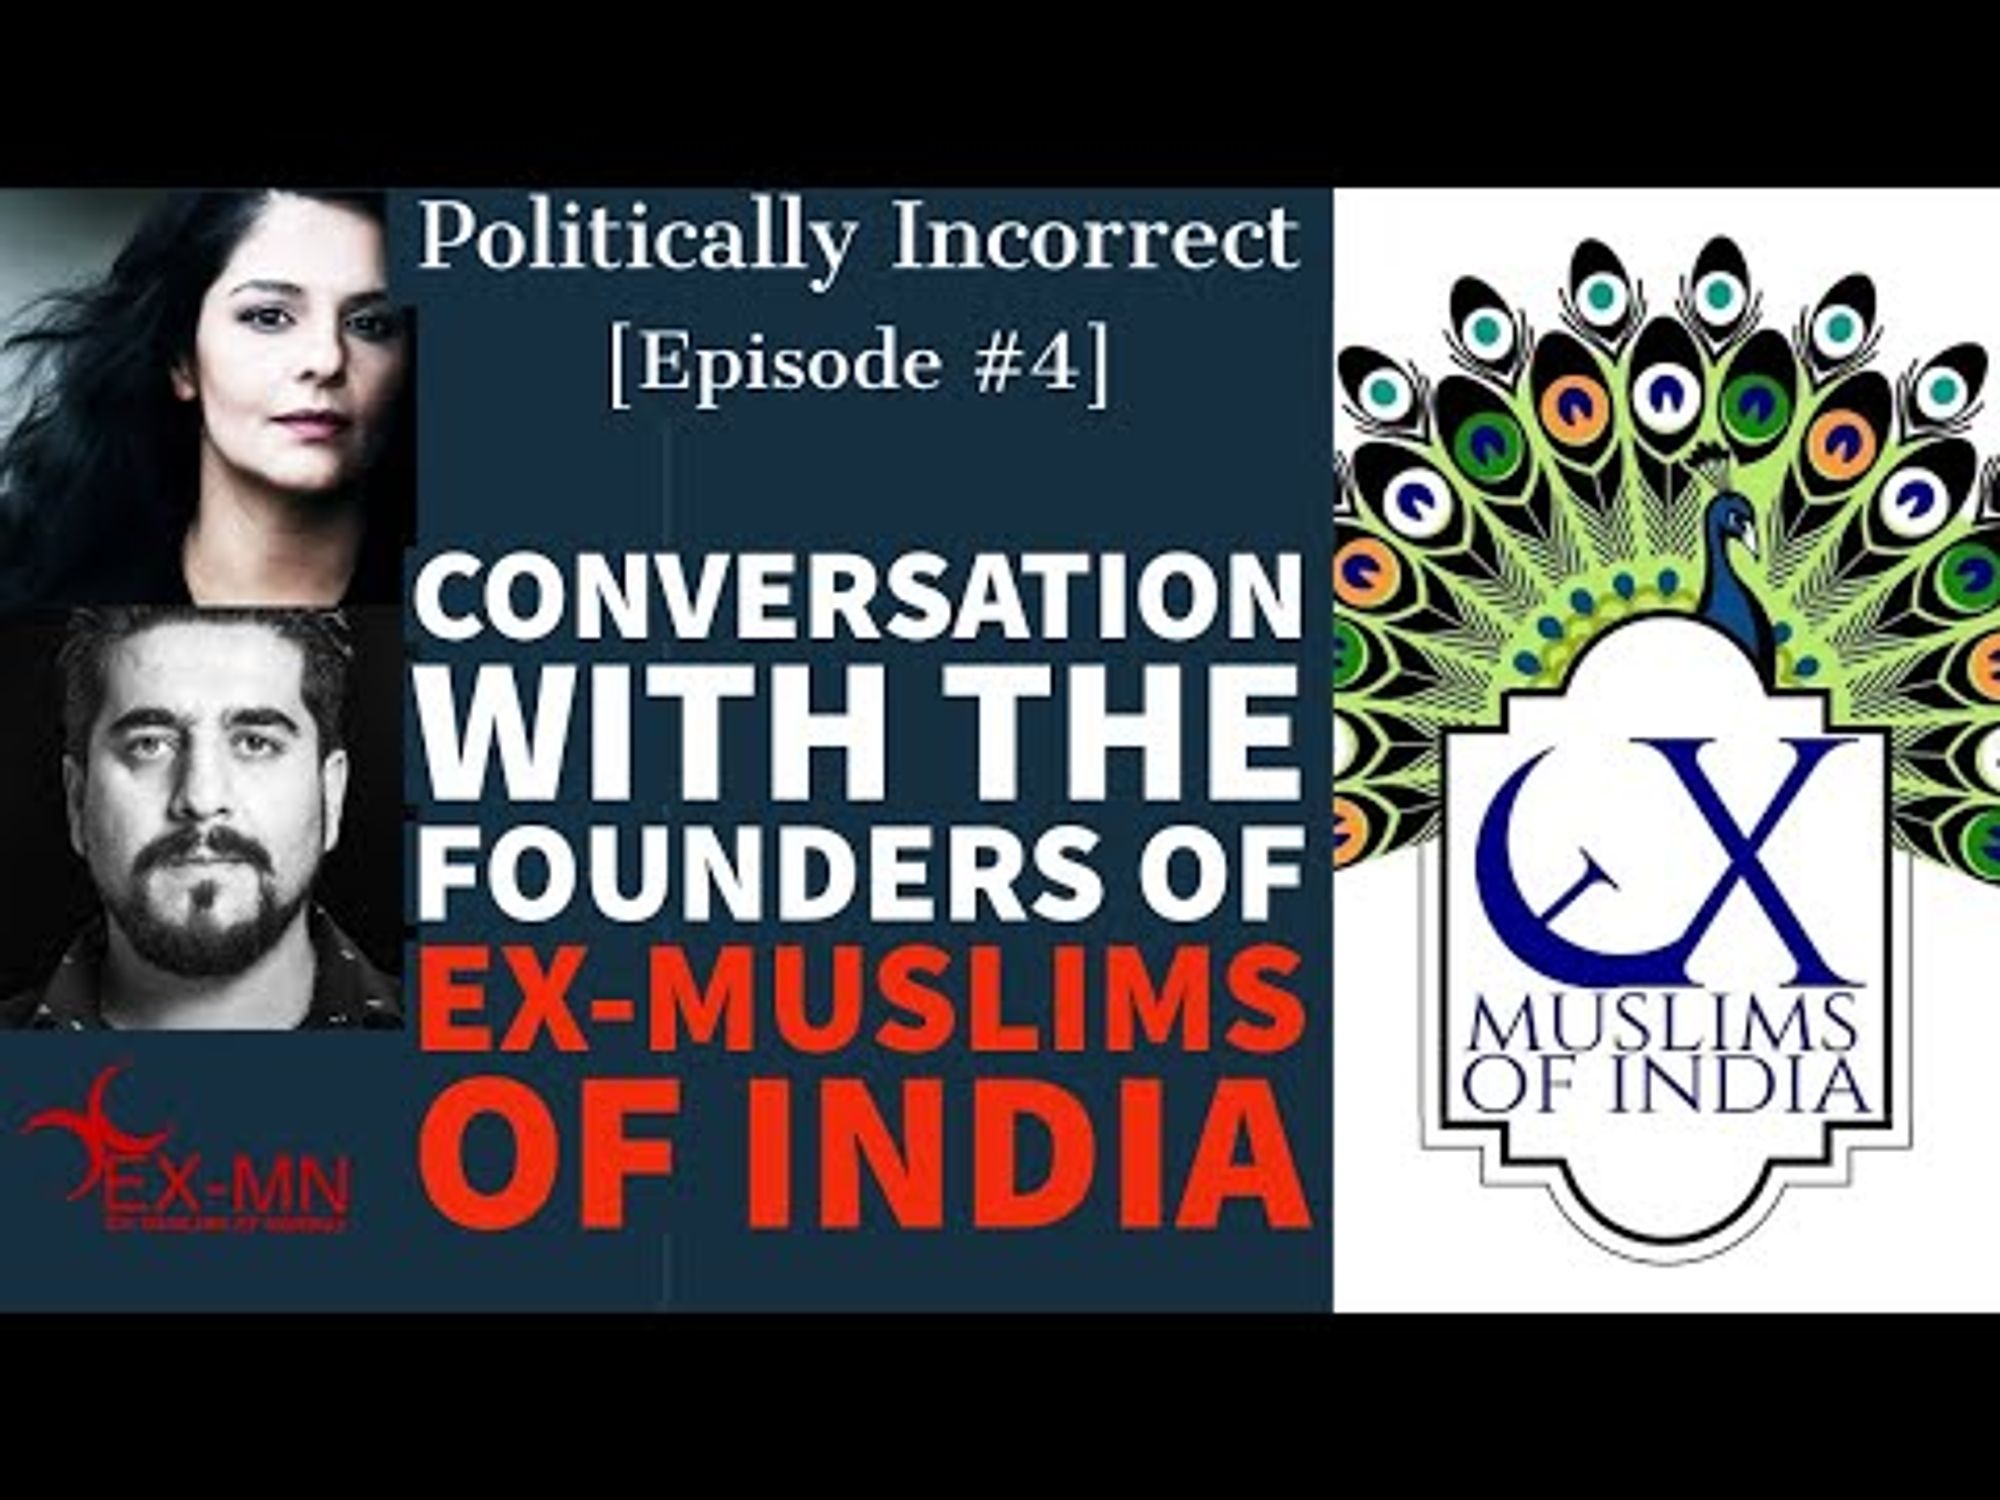 A conversation with the founders of Ex-Muslims Of India